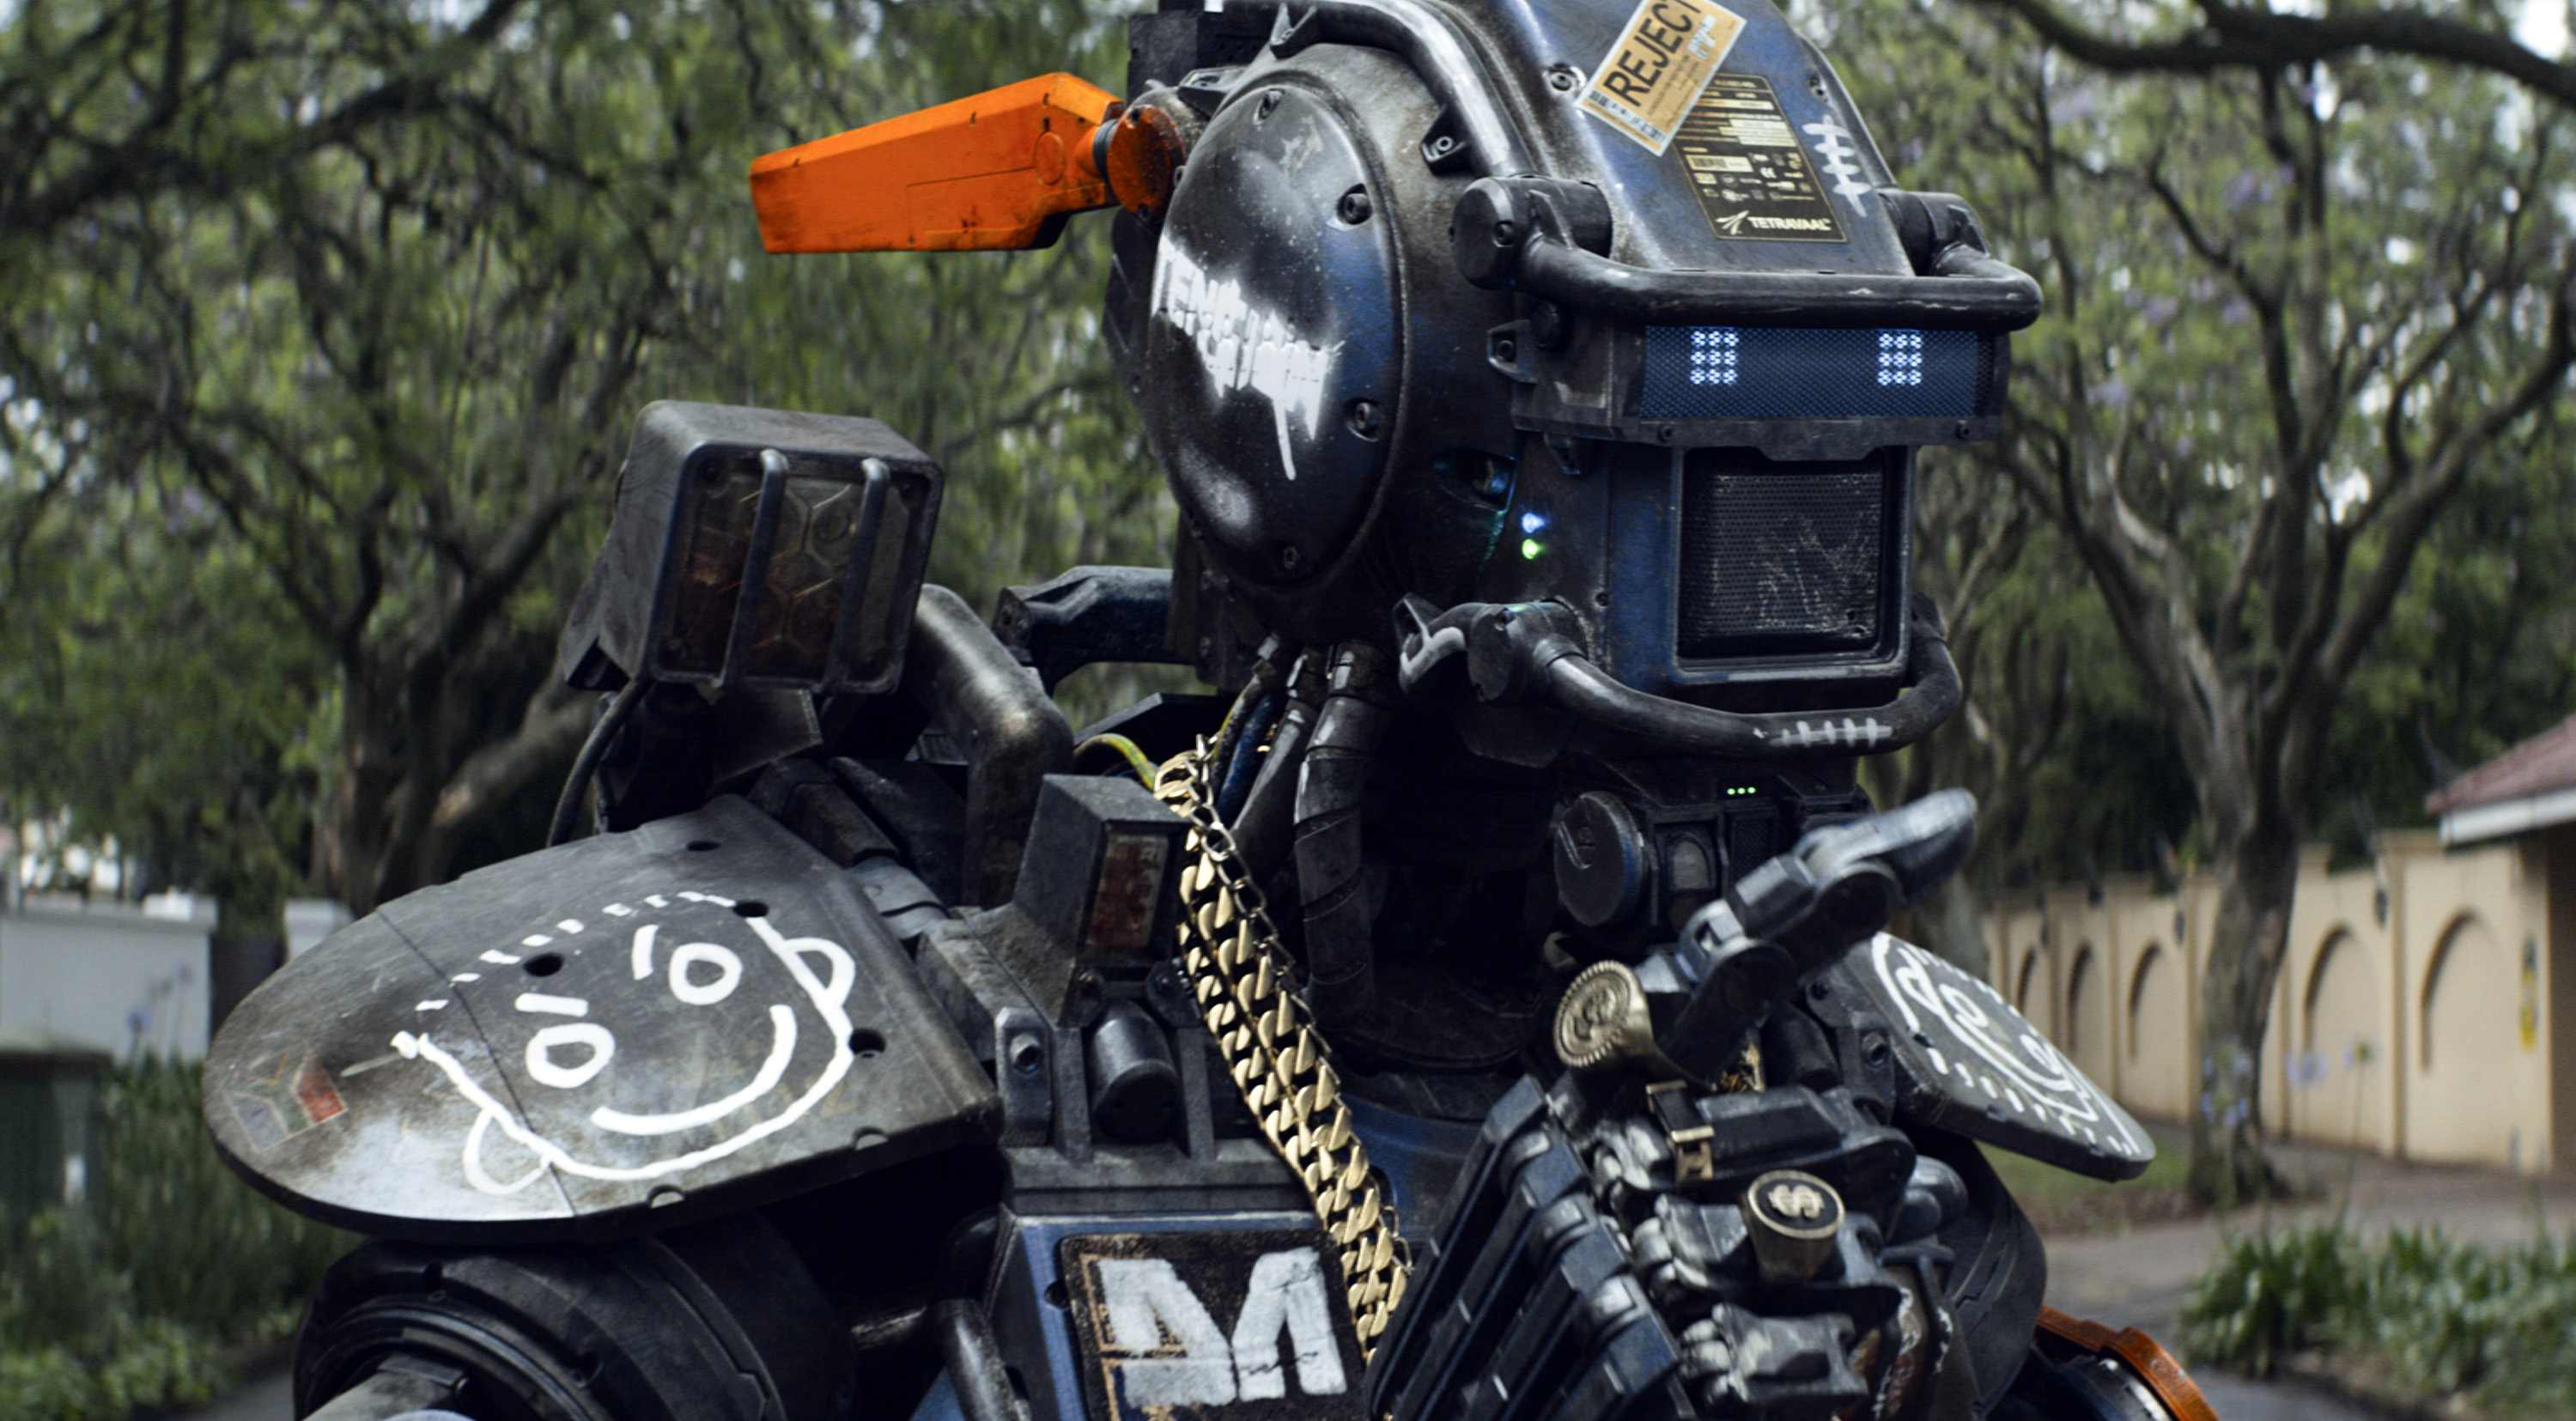 Chappie (Sharlto Copley) from Columbia Pictures' action-adventure film "Chappie." (Sony Pictures/TNS)